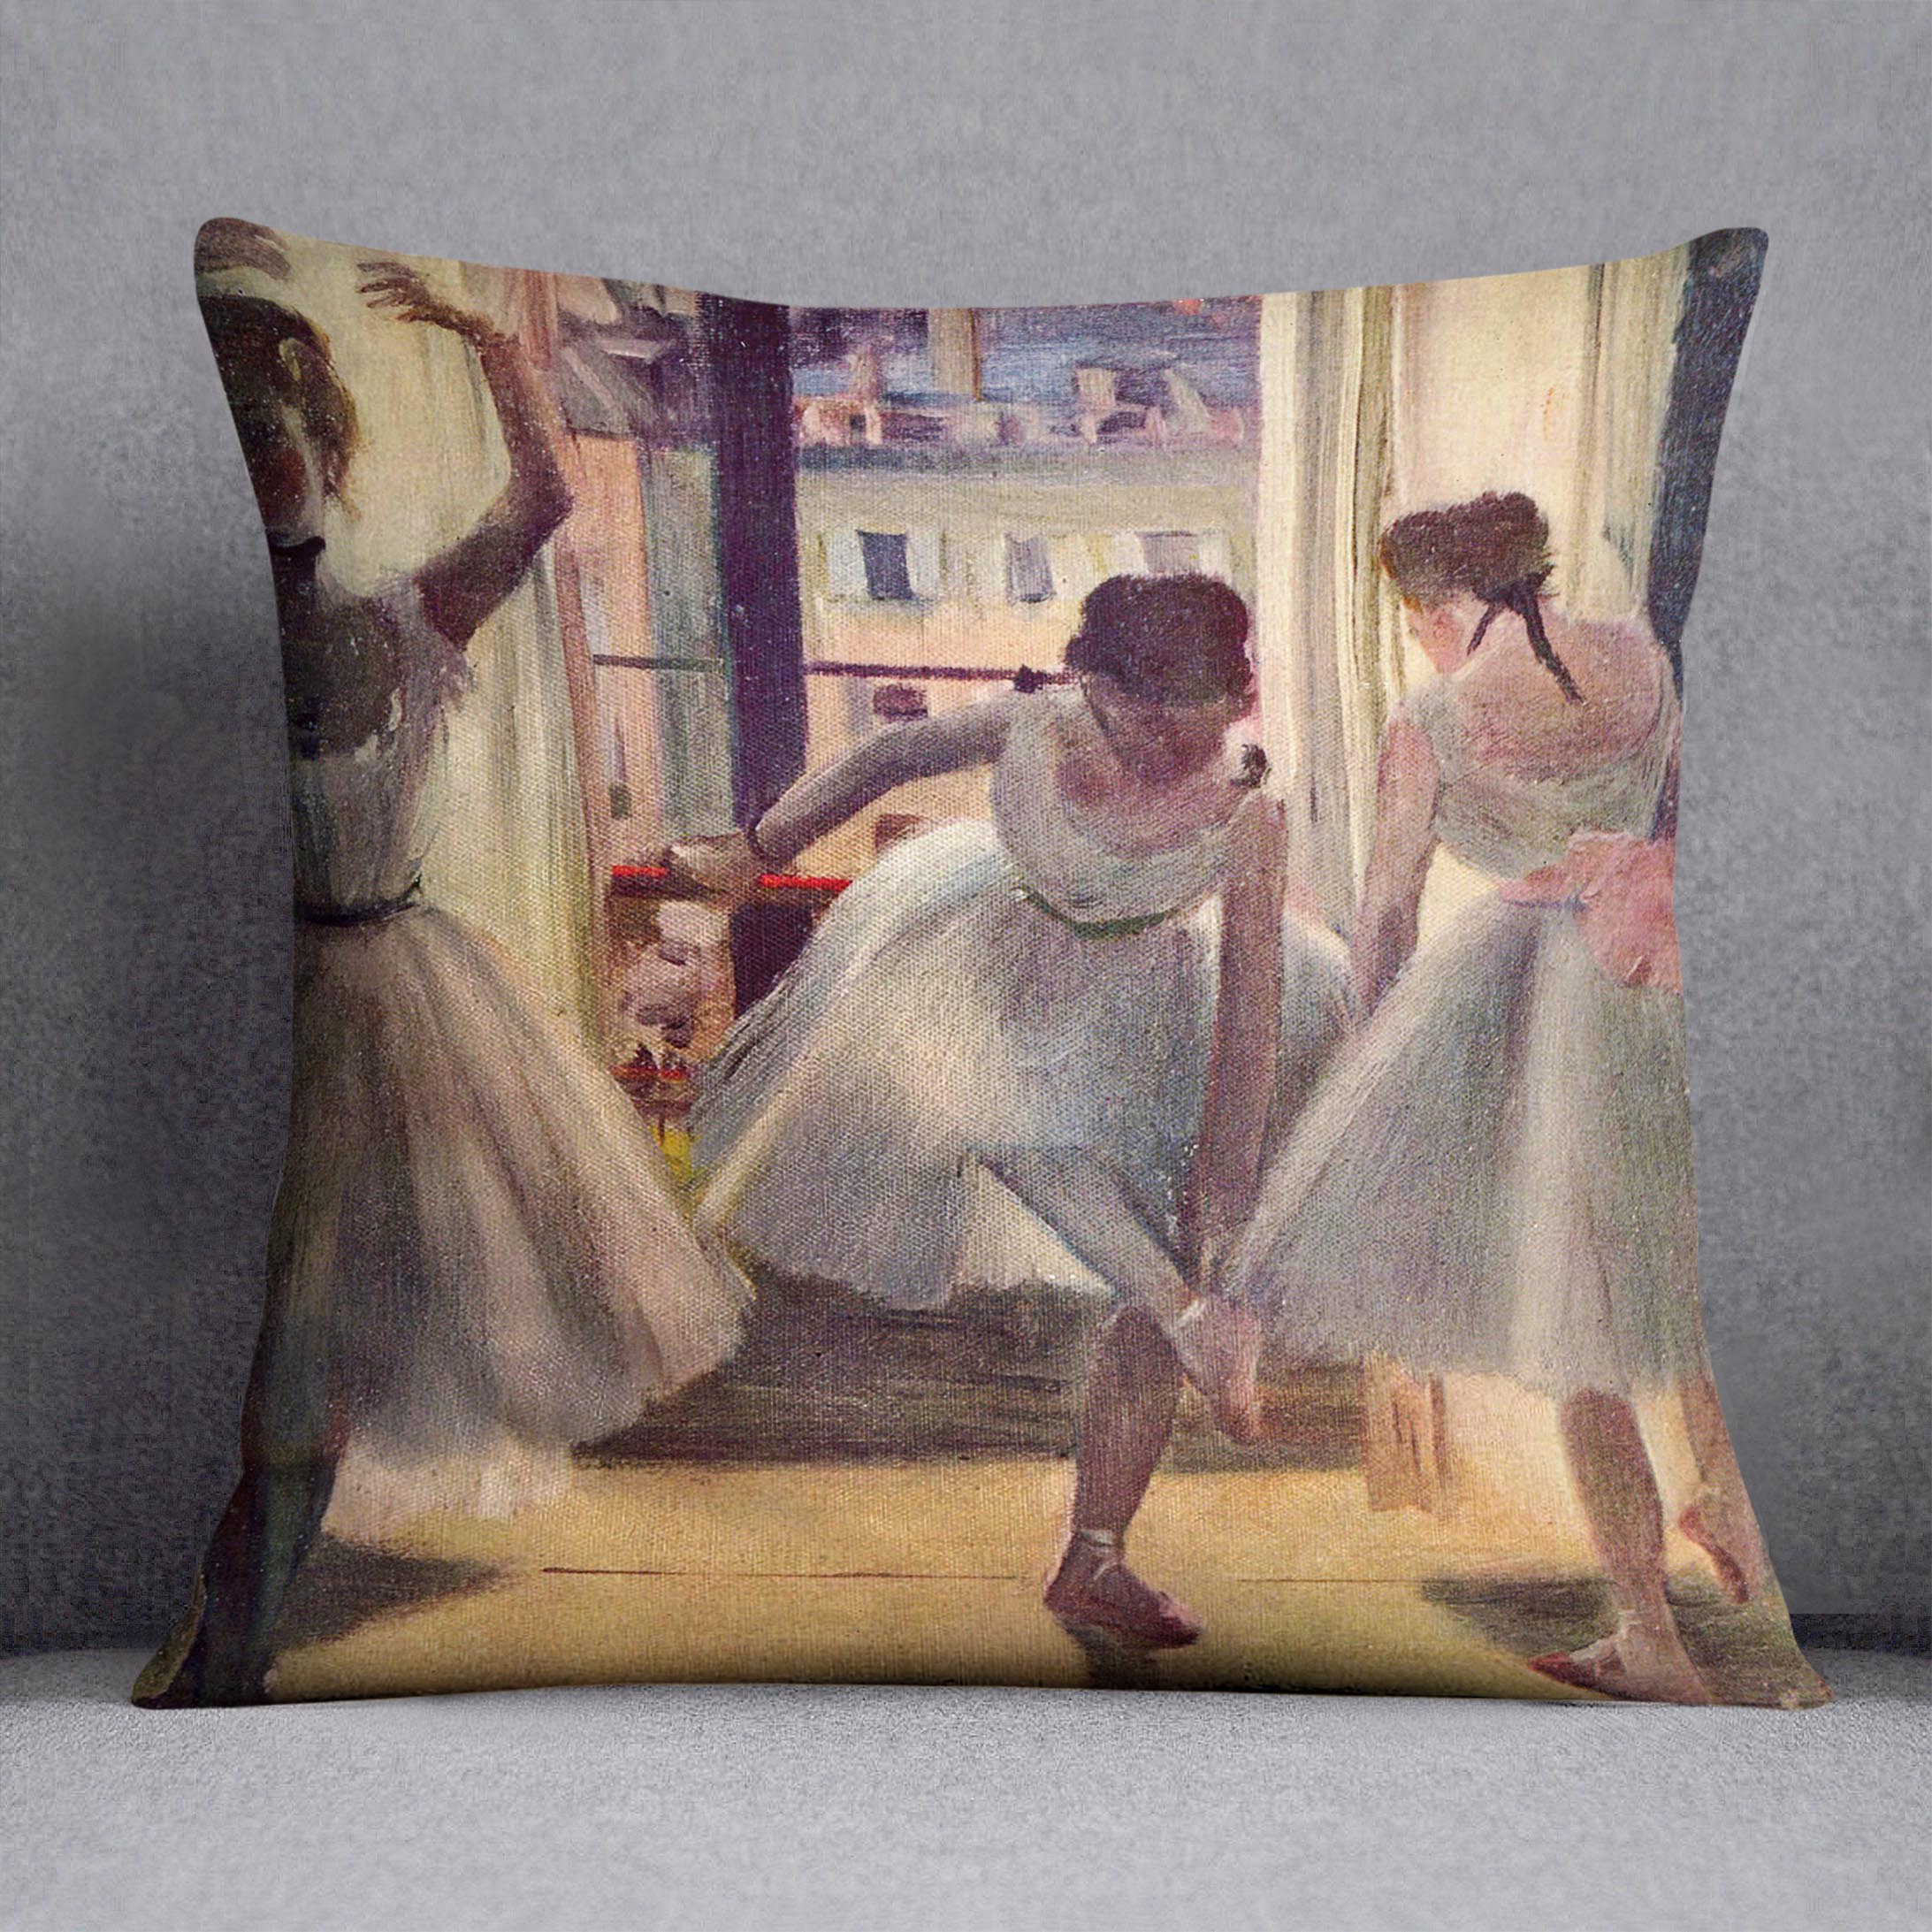 Three dancers in a practice room by Degas Cushion